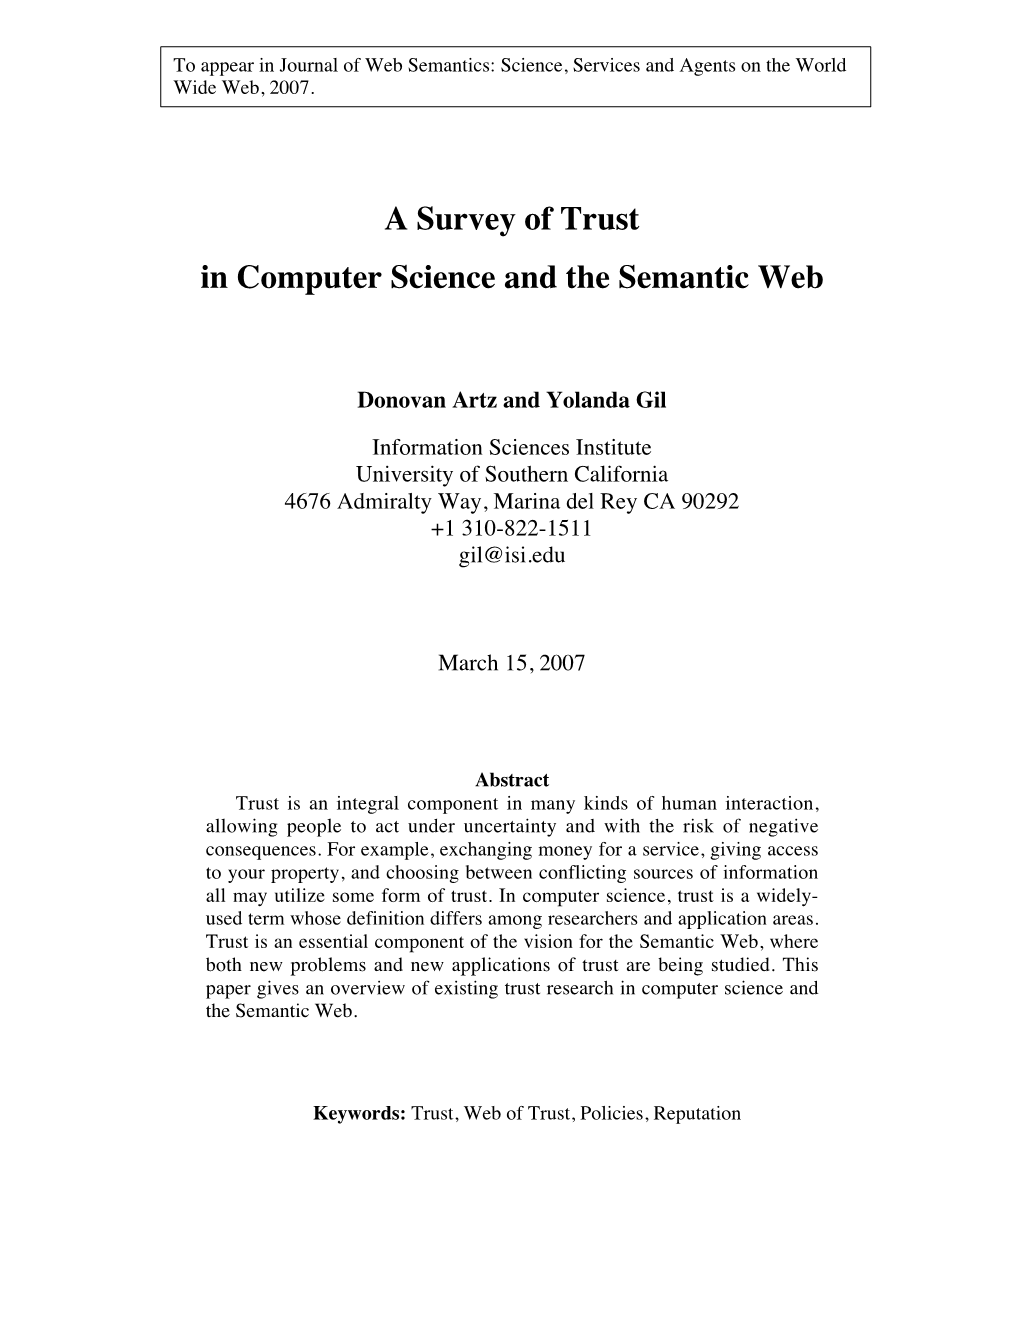 A Survey of Trust in Computer Science and the Semantic Web